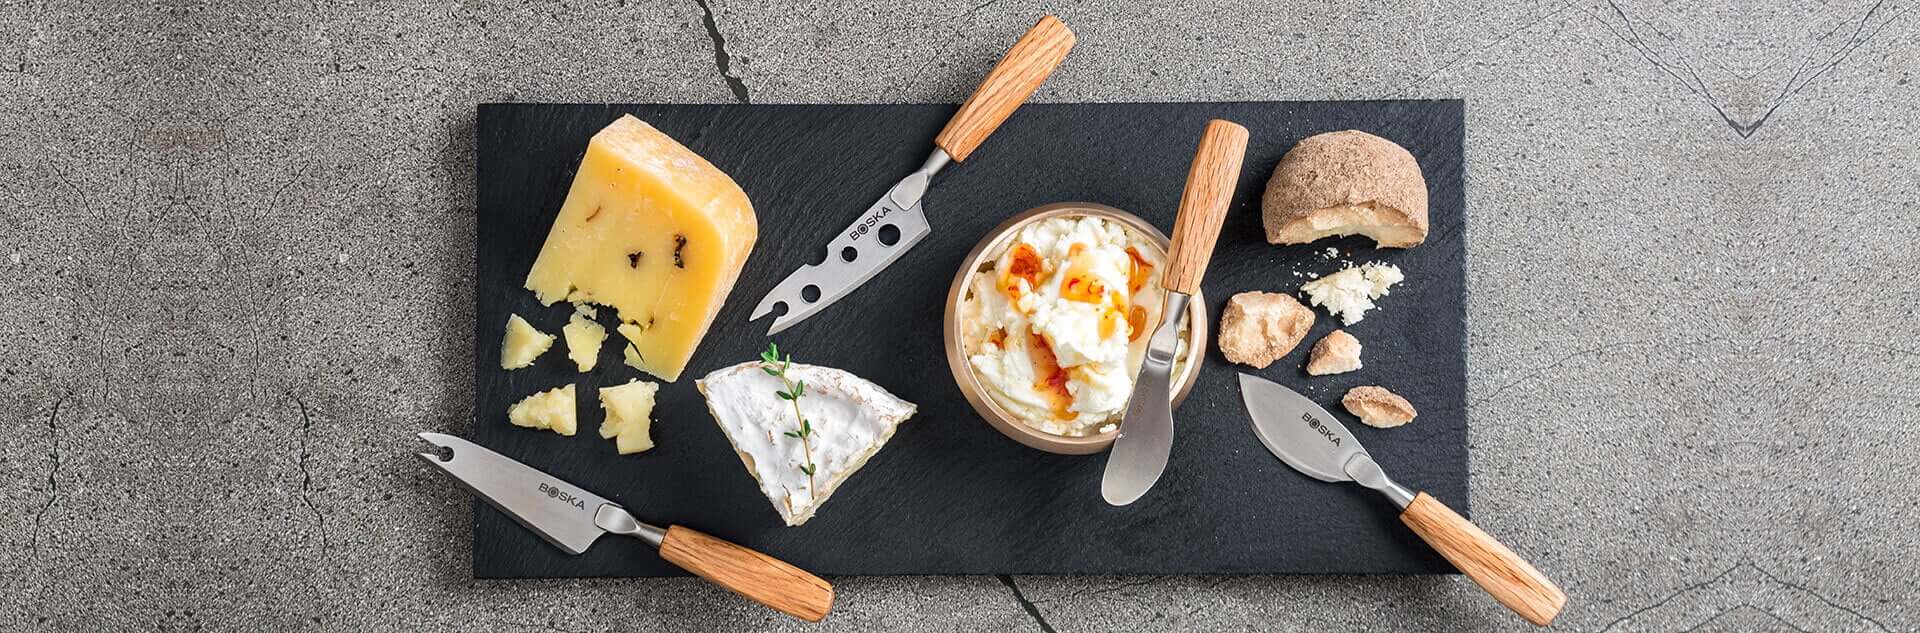 https://eleftheriacheese.com/wp-content/uploads/2022/11/eleftheria-curated-cheese-accessories.jpg